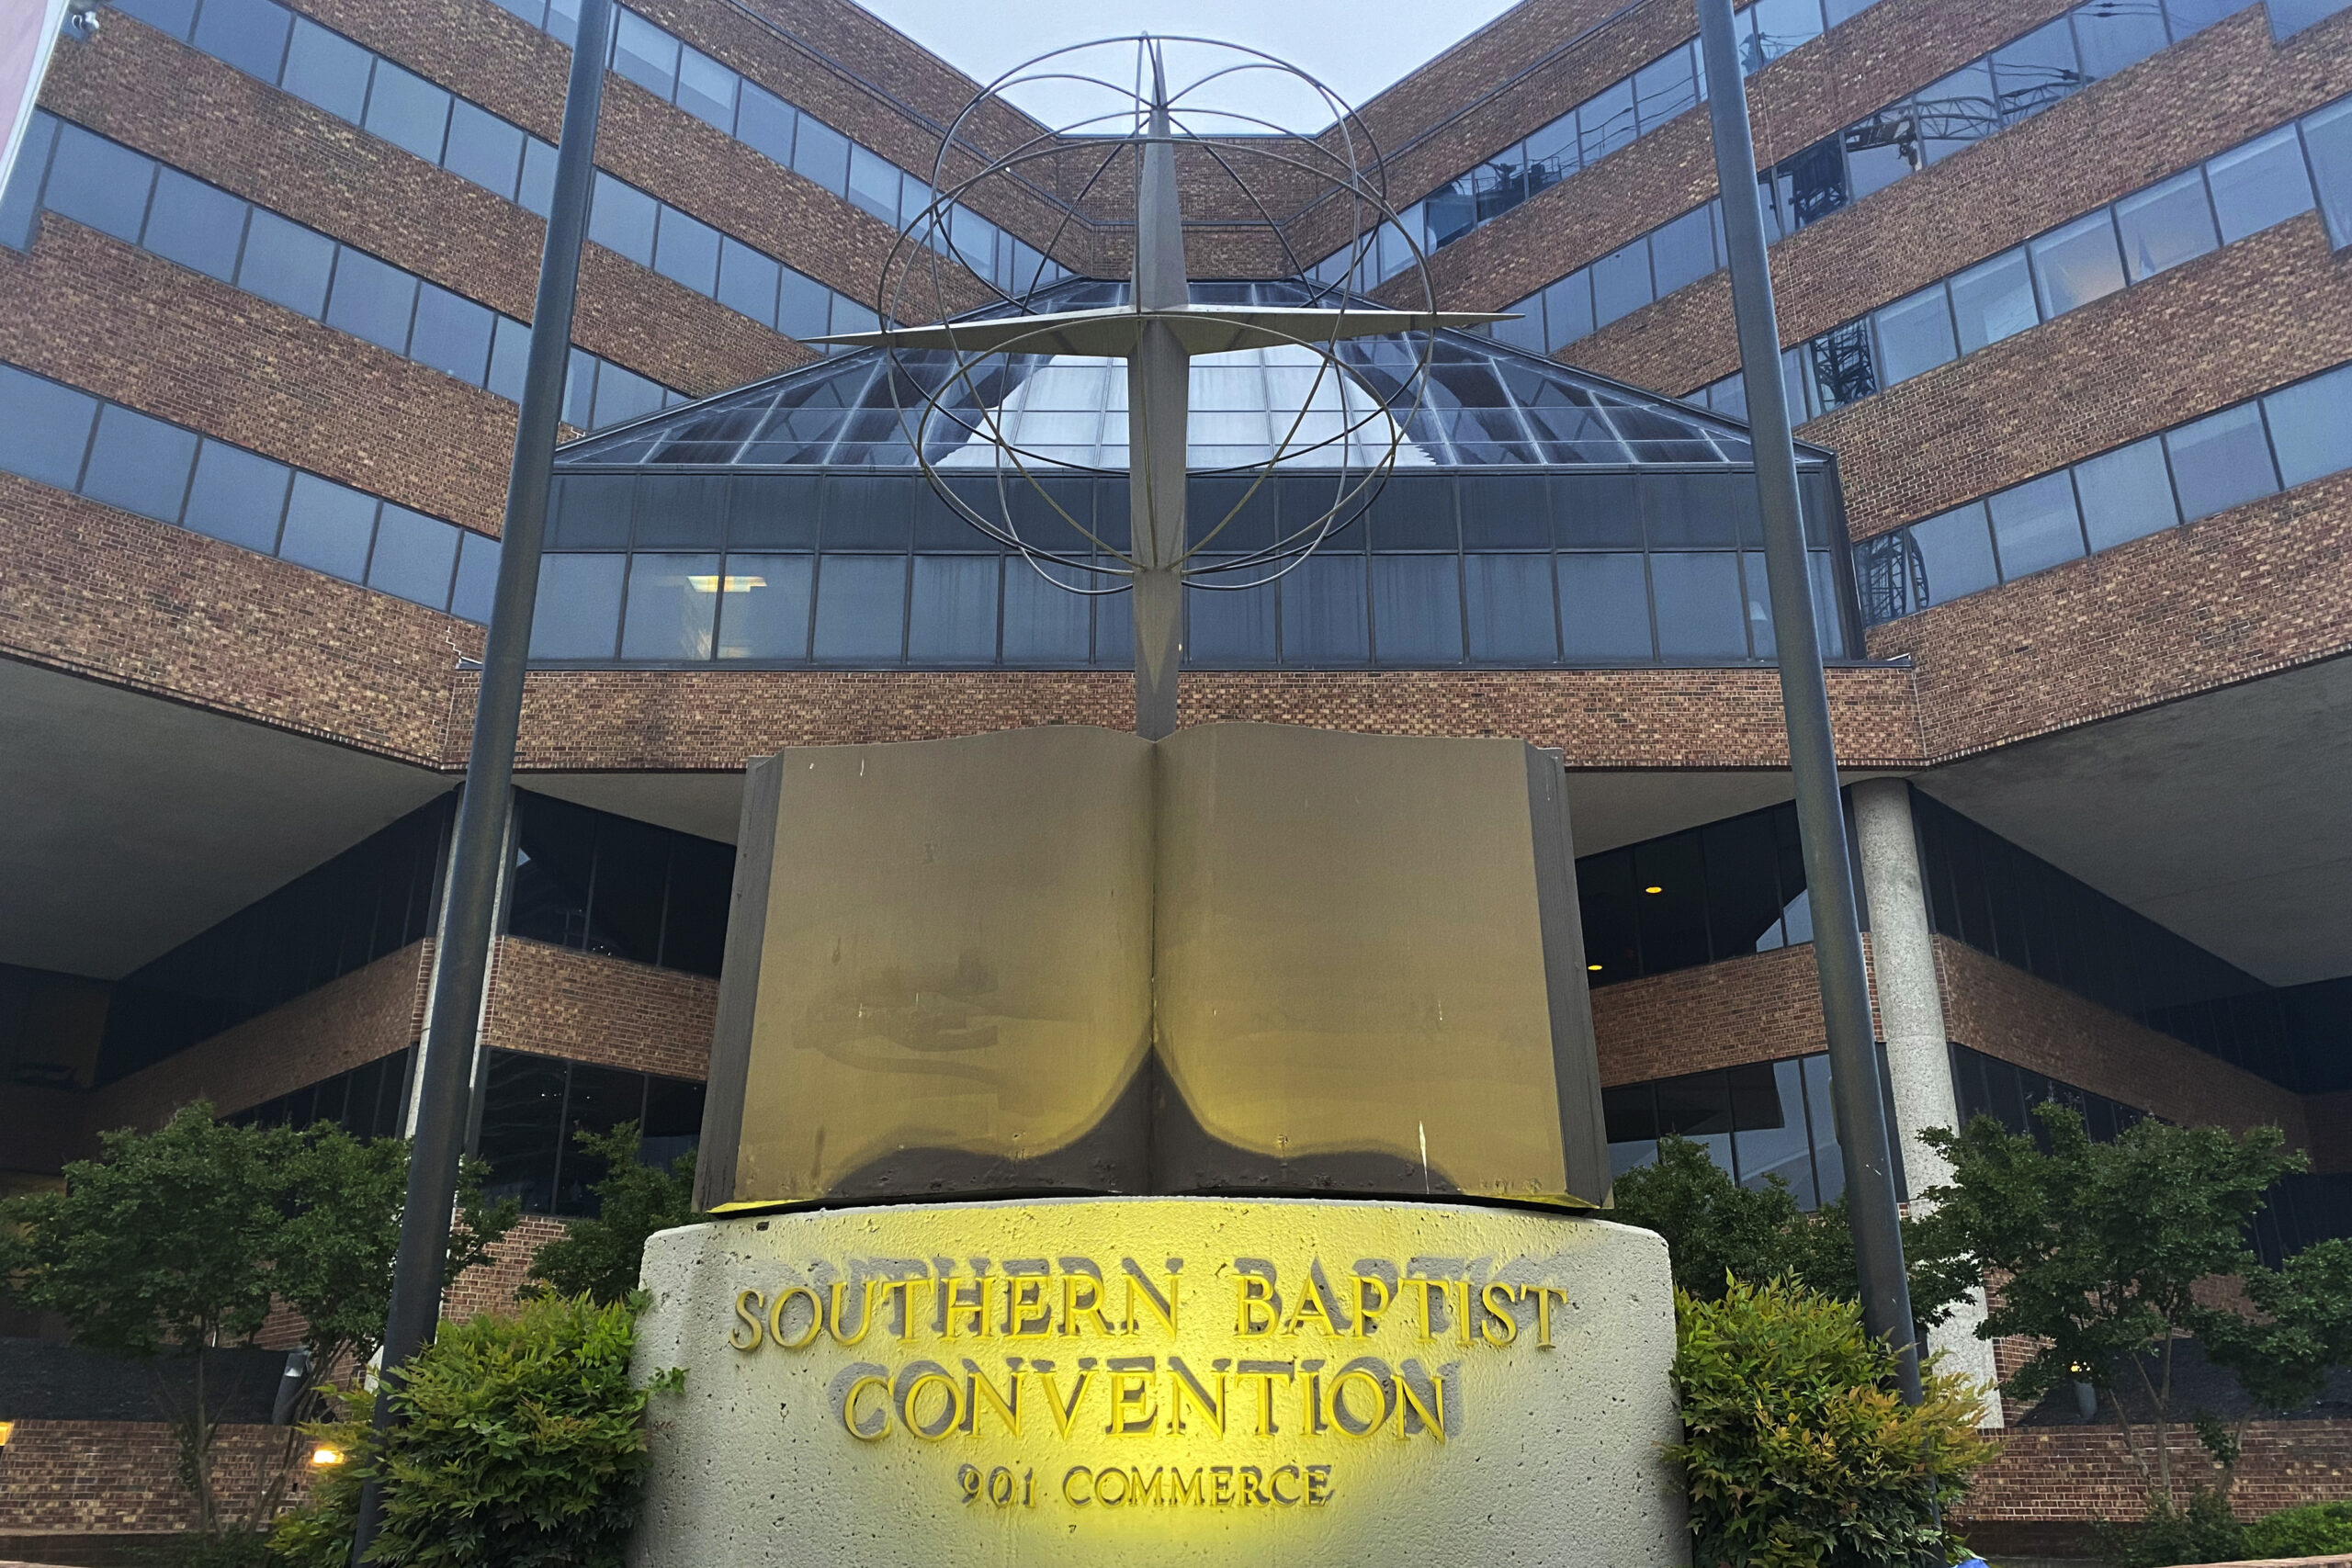 FILE - A cross and Bible sculpture stand outside the Southern Baptist Convention headquarters in Nashville, Tenn., May 24, 2022. (AP Photo/Holly Meyer, File)